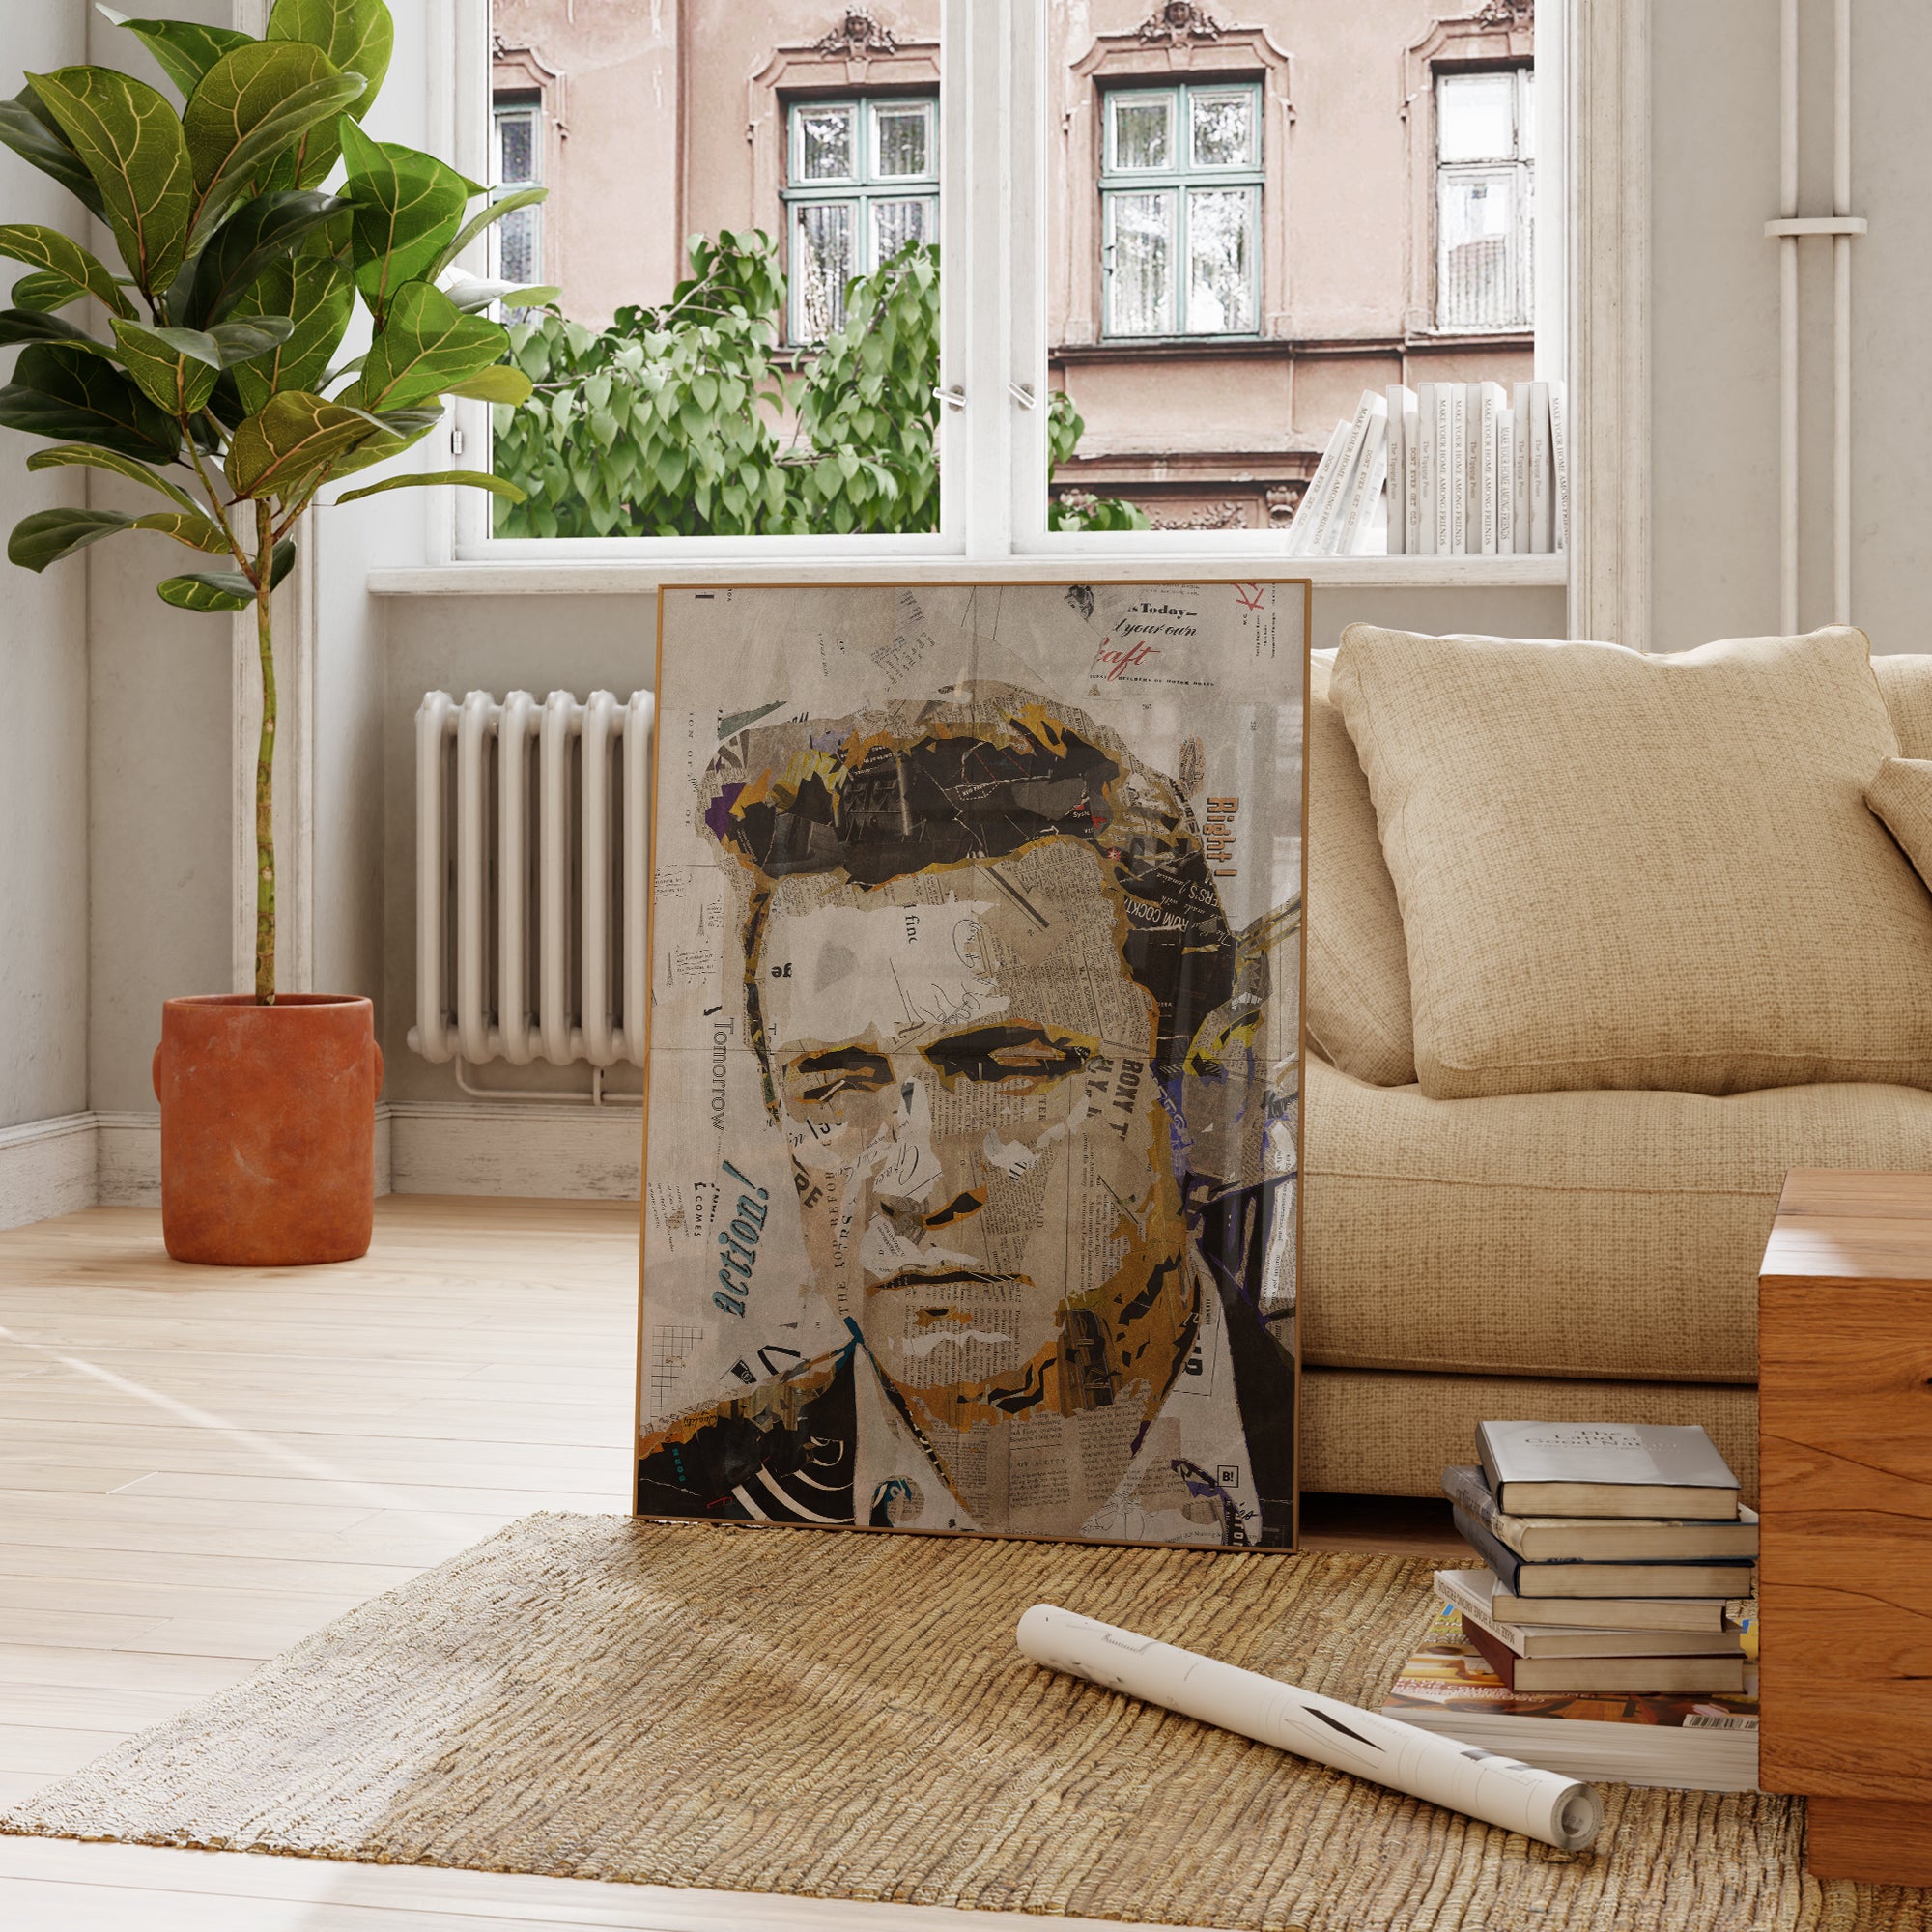 Be inspired by our iconic collage portrait art print of Johnny Cash. This artwork was printed using the giclée process on archival acid-free paper and is presented in a French living room, capturing its timeless beauty in every detail.